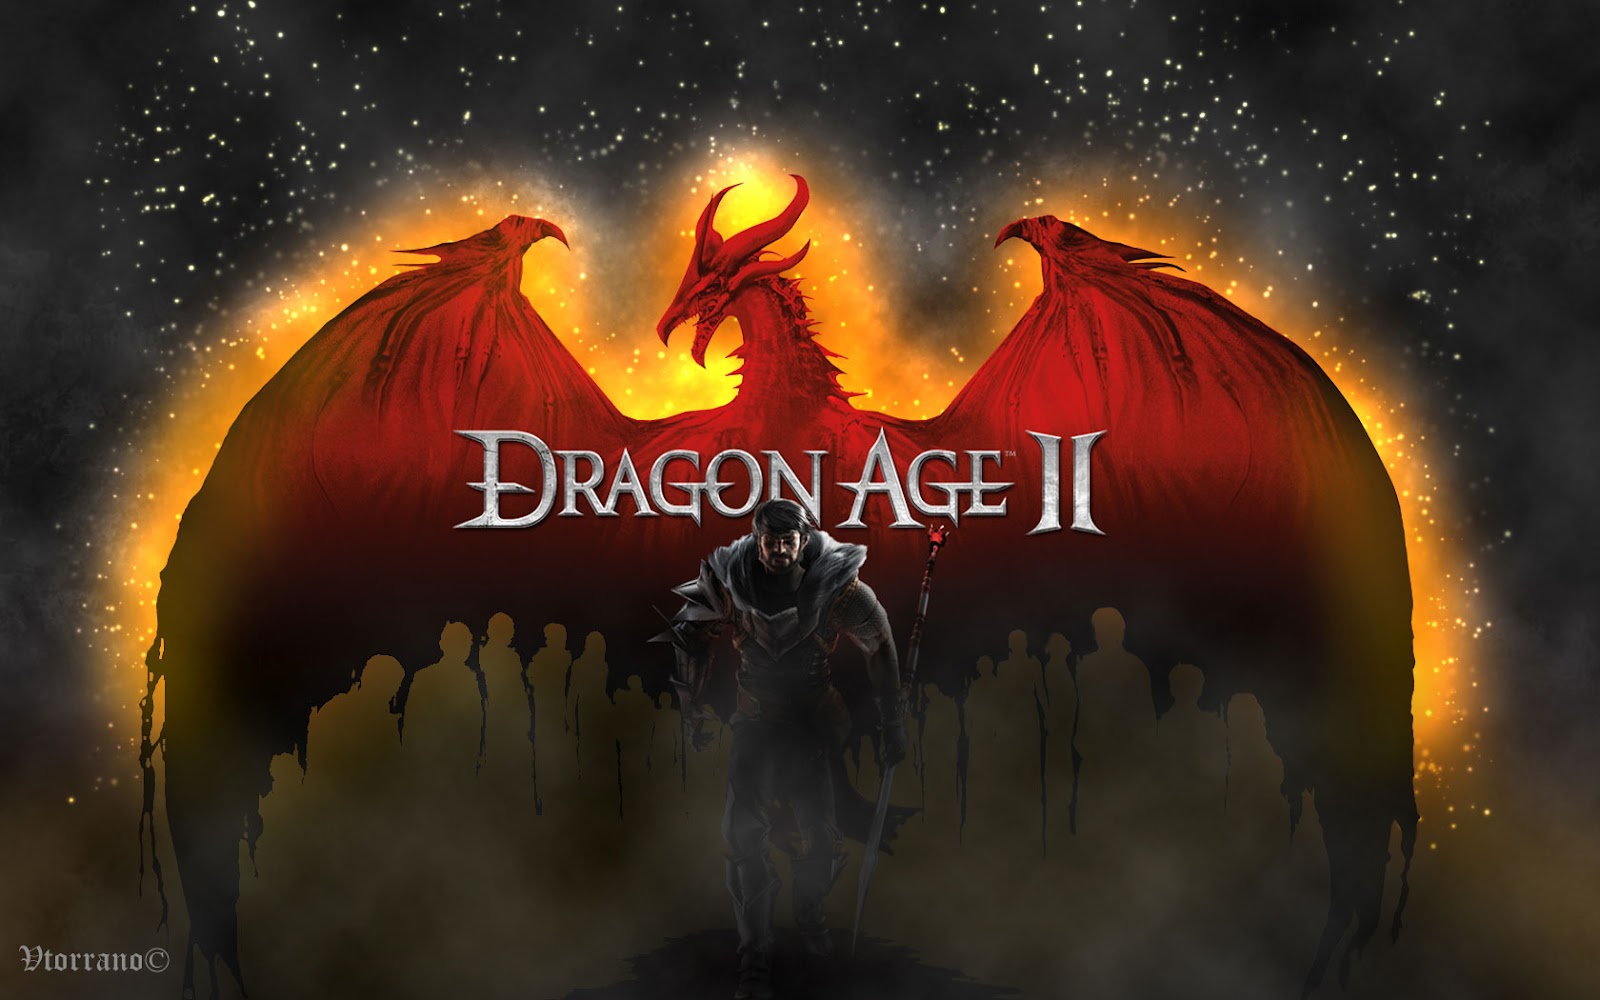 PC Games: Dragon Age 2 Free Download and Installation